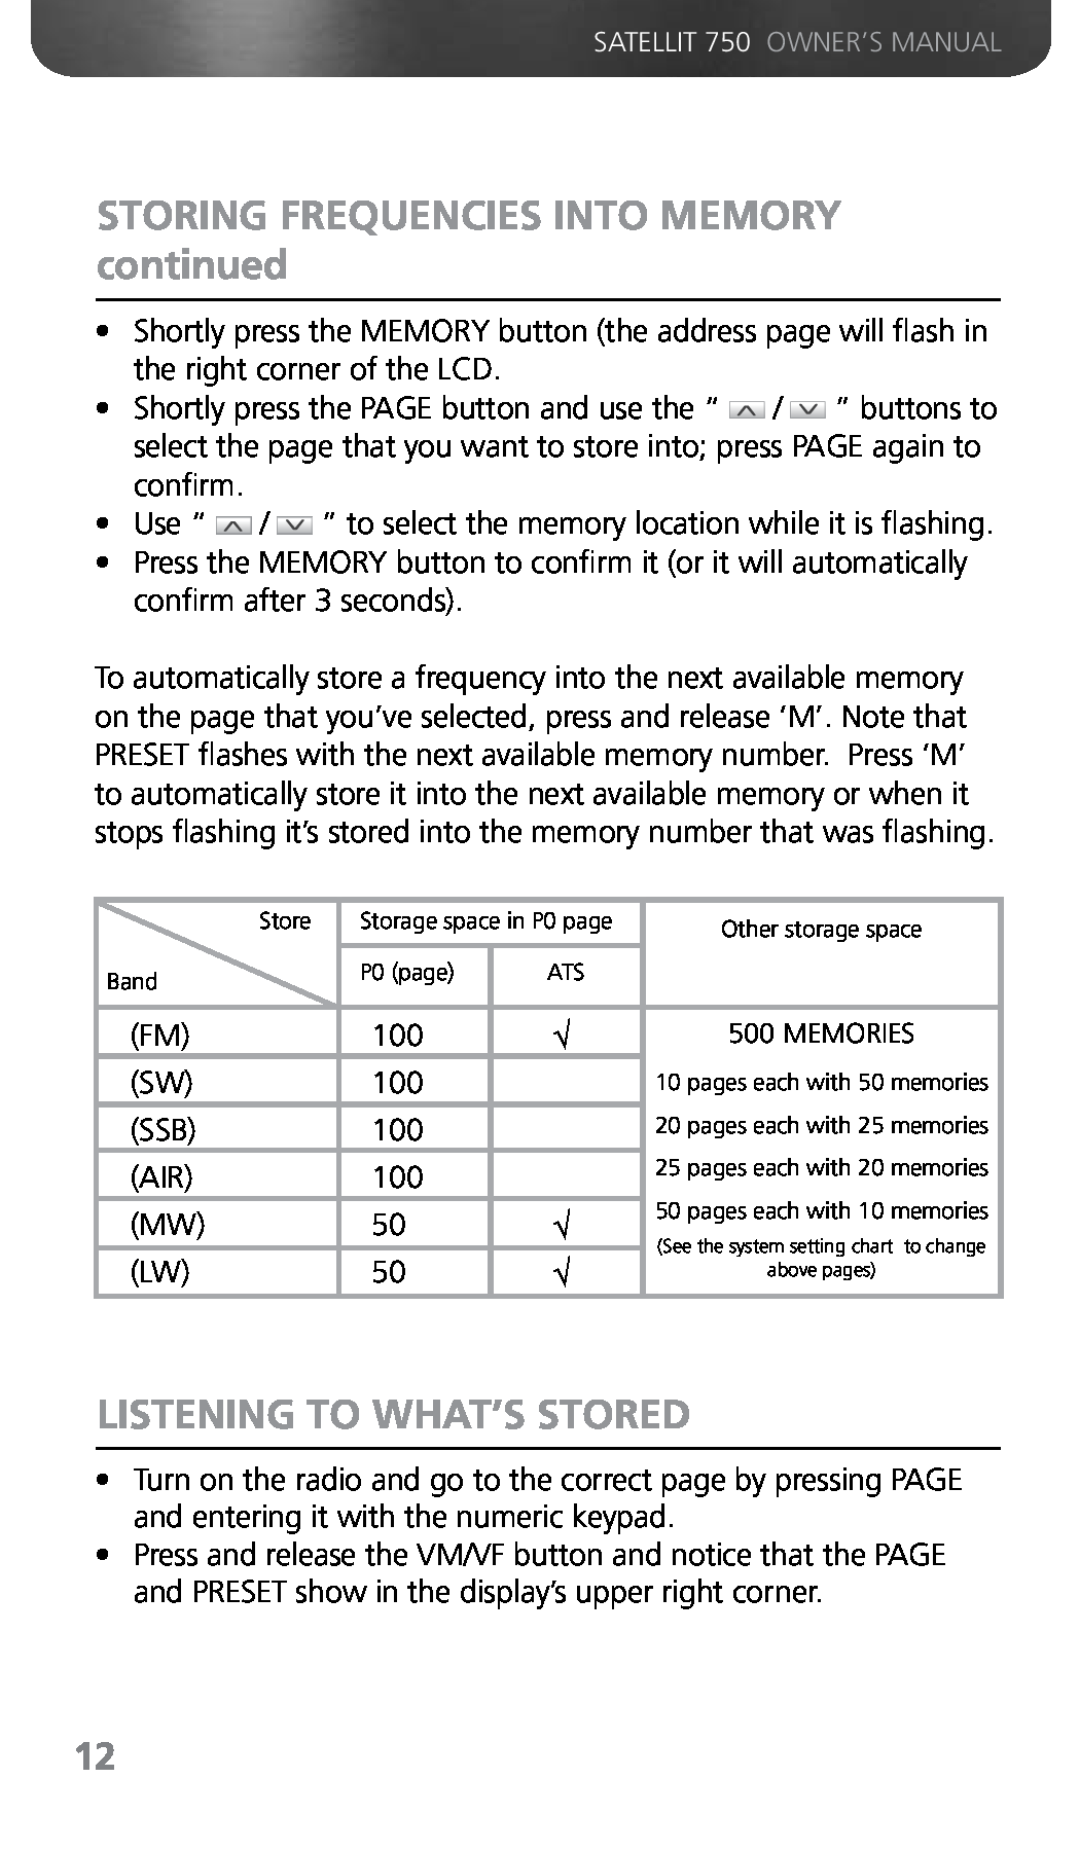 Grundig 750 owner manual STORING FREQUENCIES INTO MEMORY continued, Listening To What’S Stored 